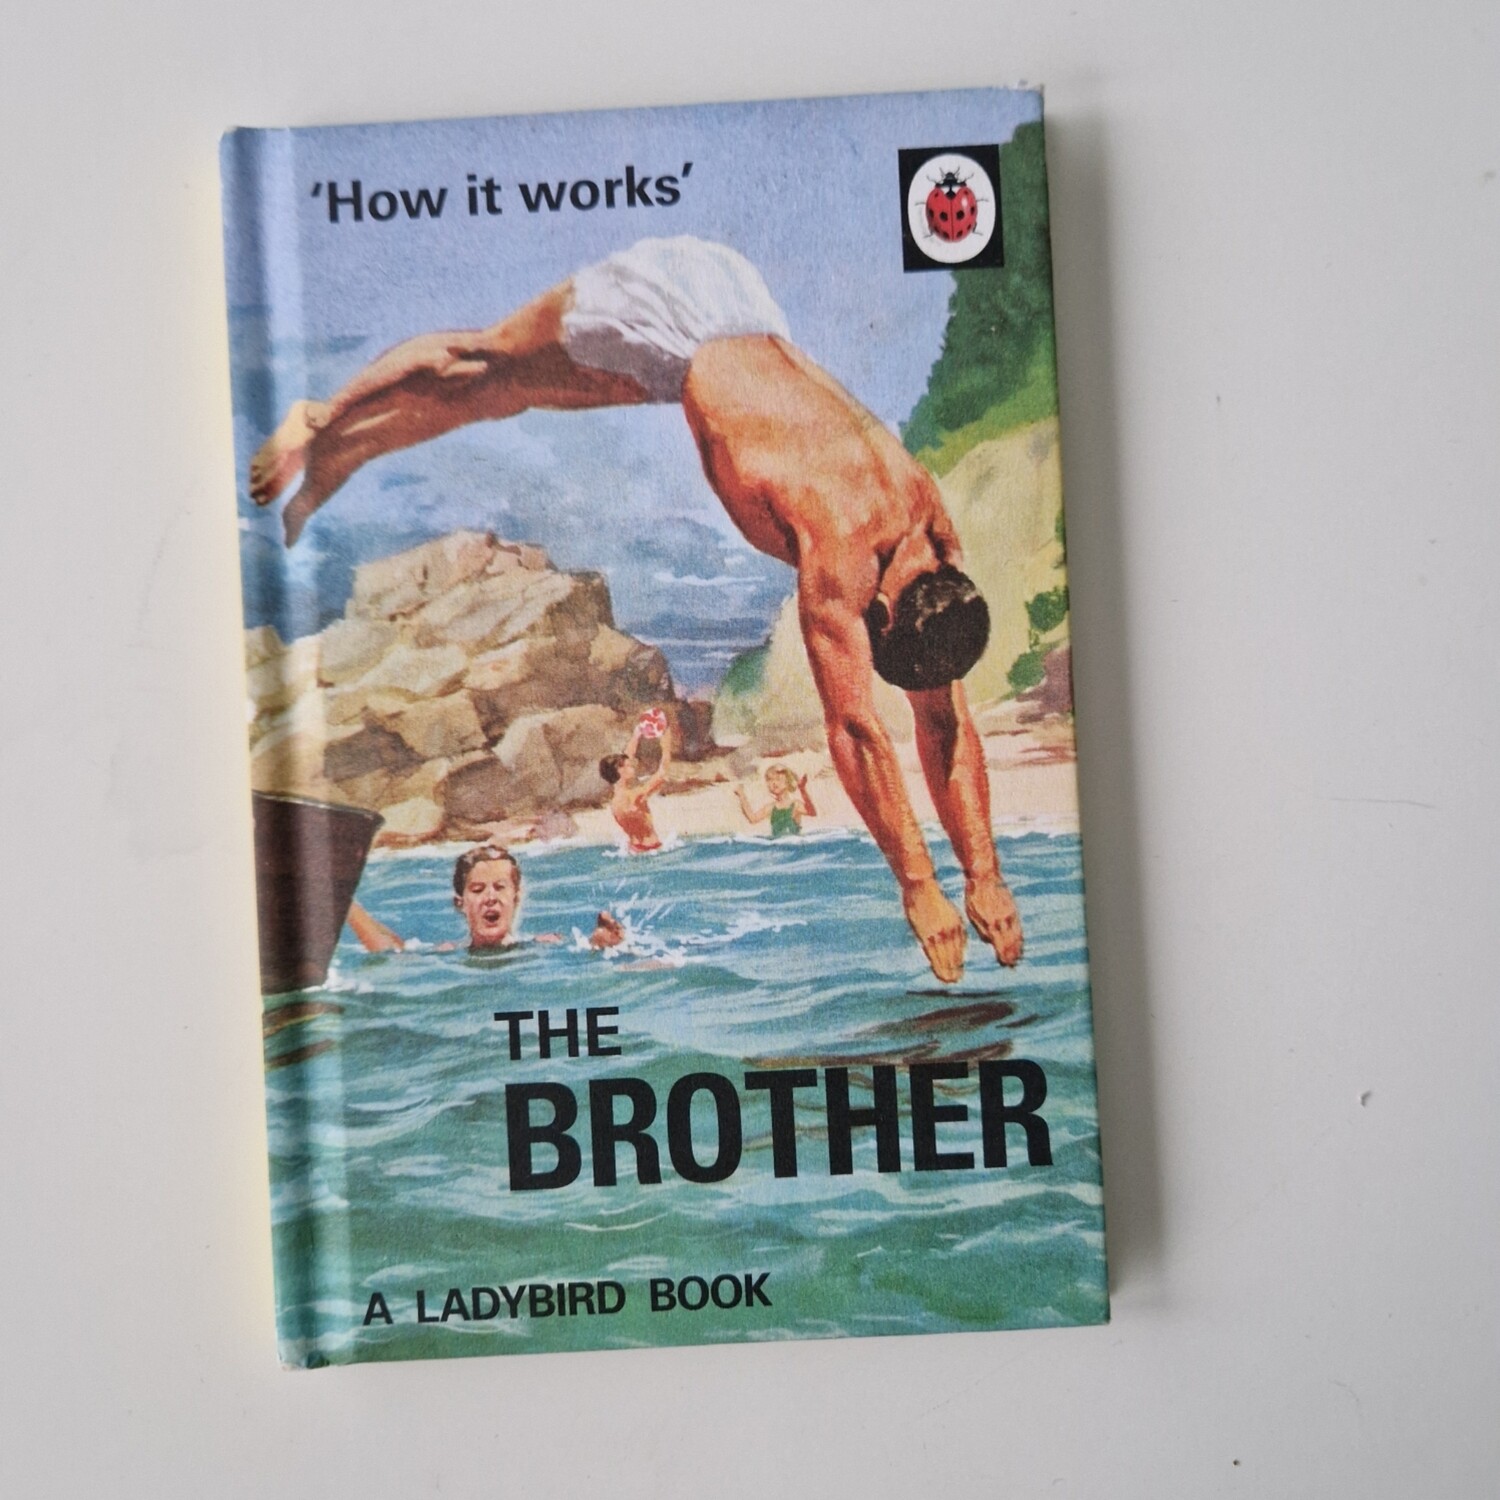 The Brother - ladybird book